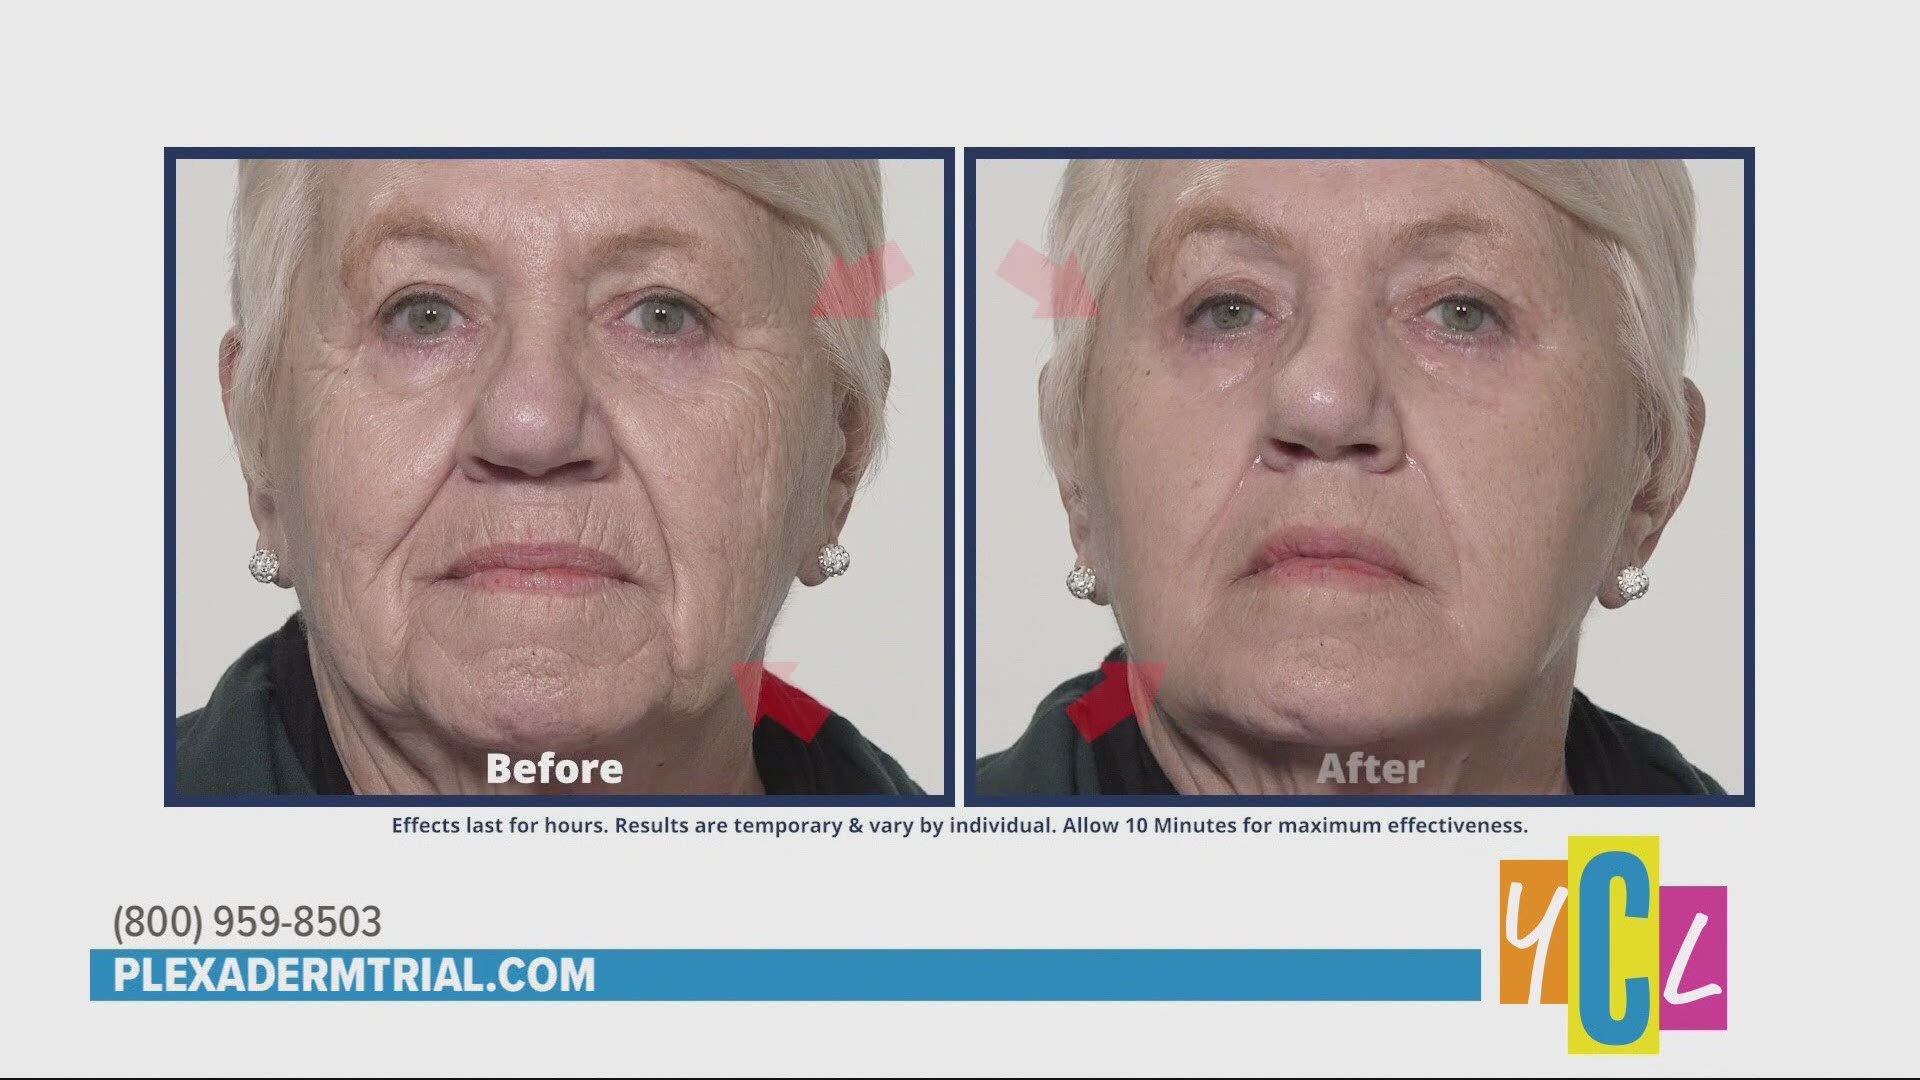 Plexaderm can help reduce the appearance of under eye bags, dark circles and wrinkles. This is a paid segment for True Earth Health Solutions.